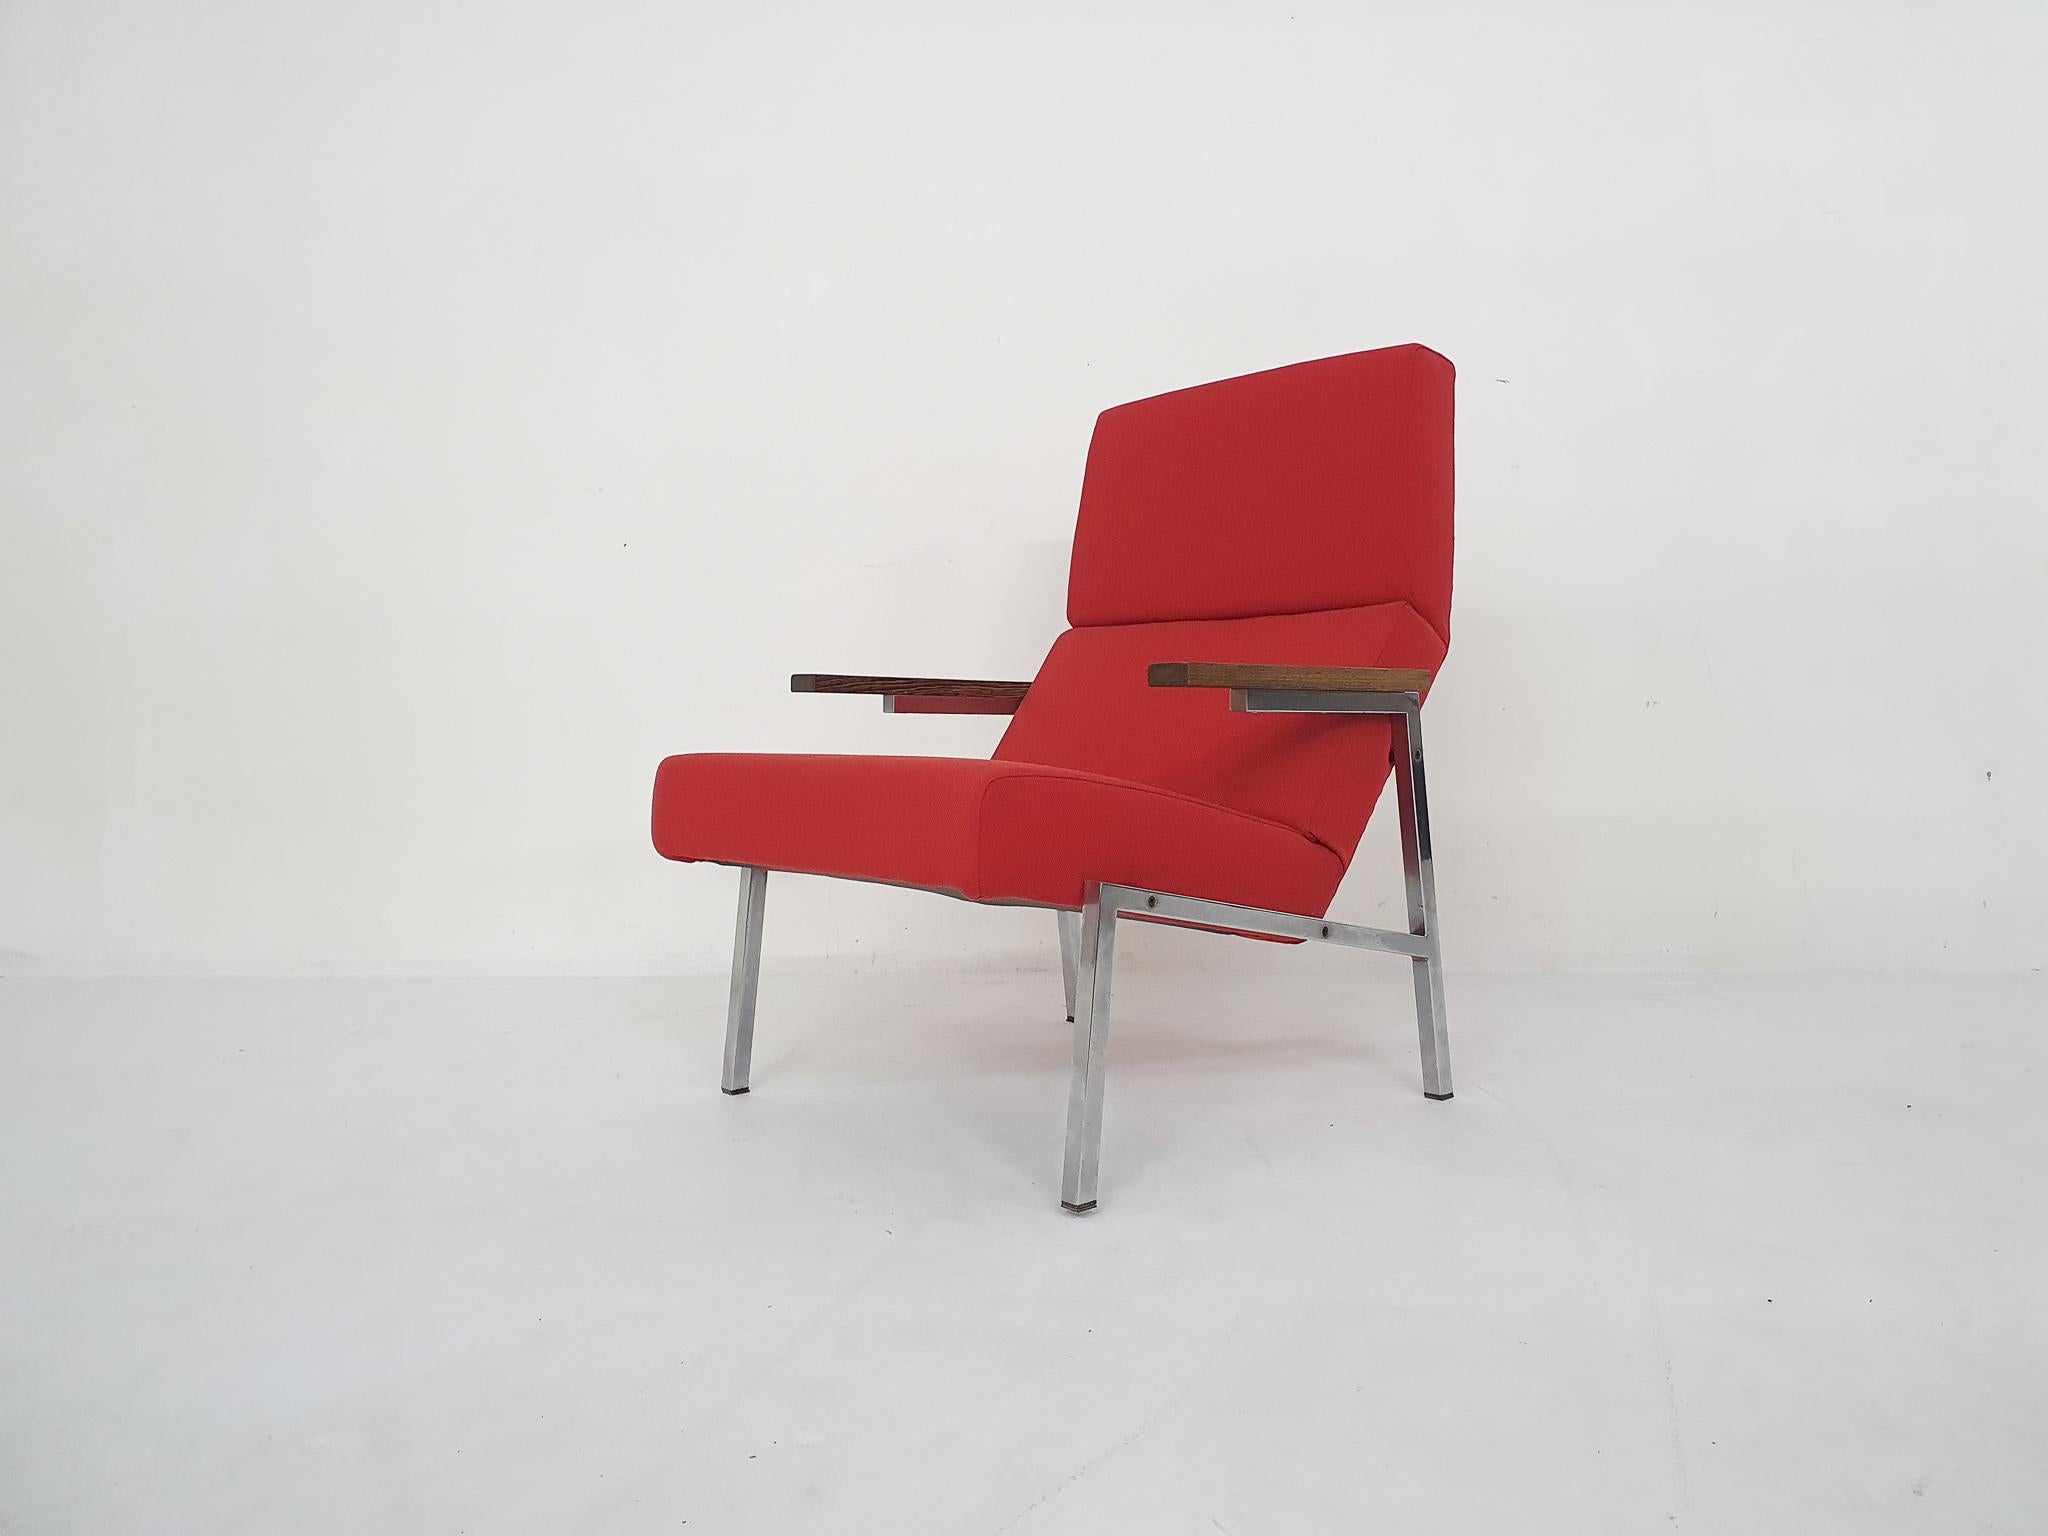 Metal frame and wenge arm rests. With new red upholstery.
In good condition.

Martin Visser
Martin Visser was one of the leading Dutch designers of the mid-century together with Cees Braakman, Gijs van der Sluis, Coen de Vries, Rob Parry and